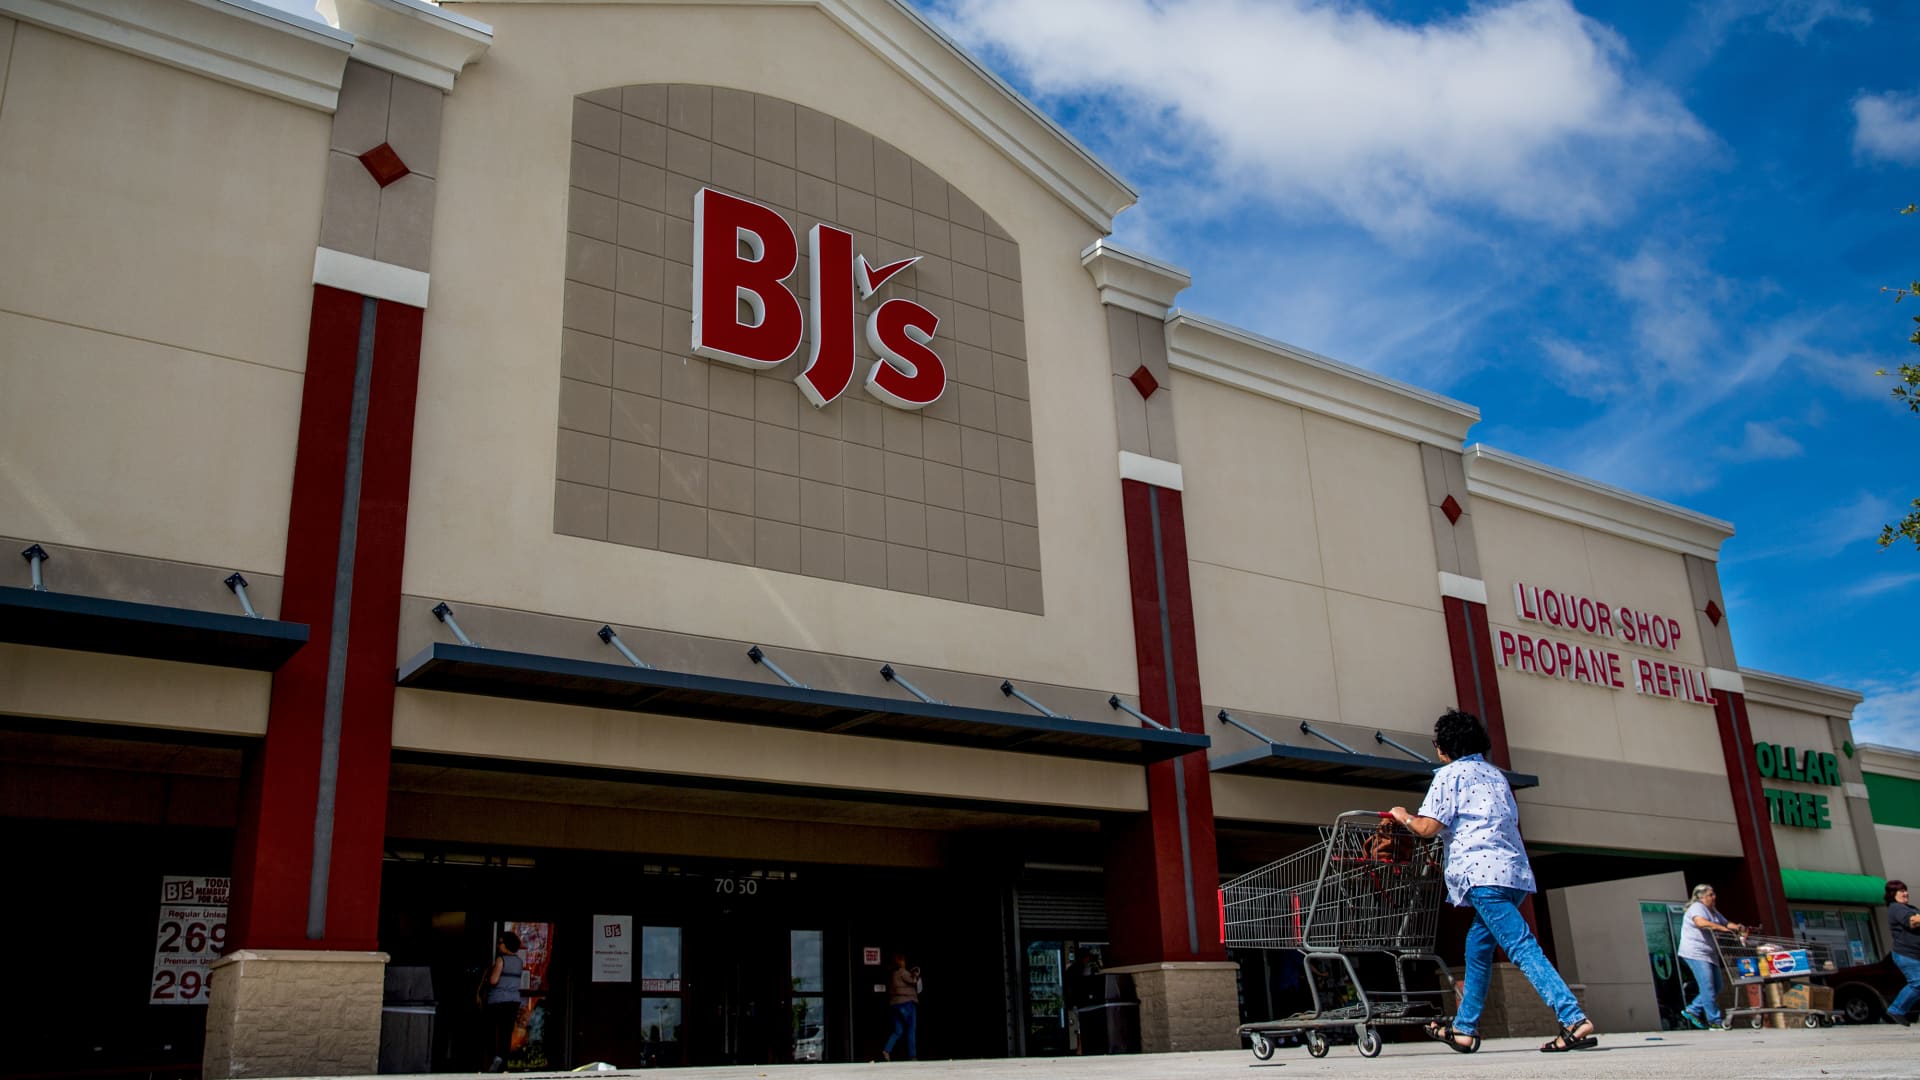 A customer pushes a shopping cart towards the entrance of a BJ's Wholesale Club Holdings Inc. location in Miami, Florida.